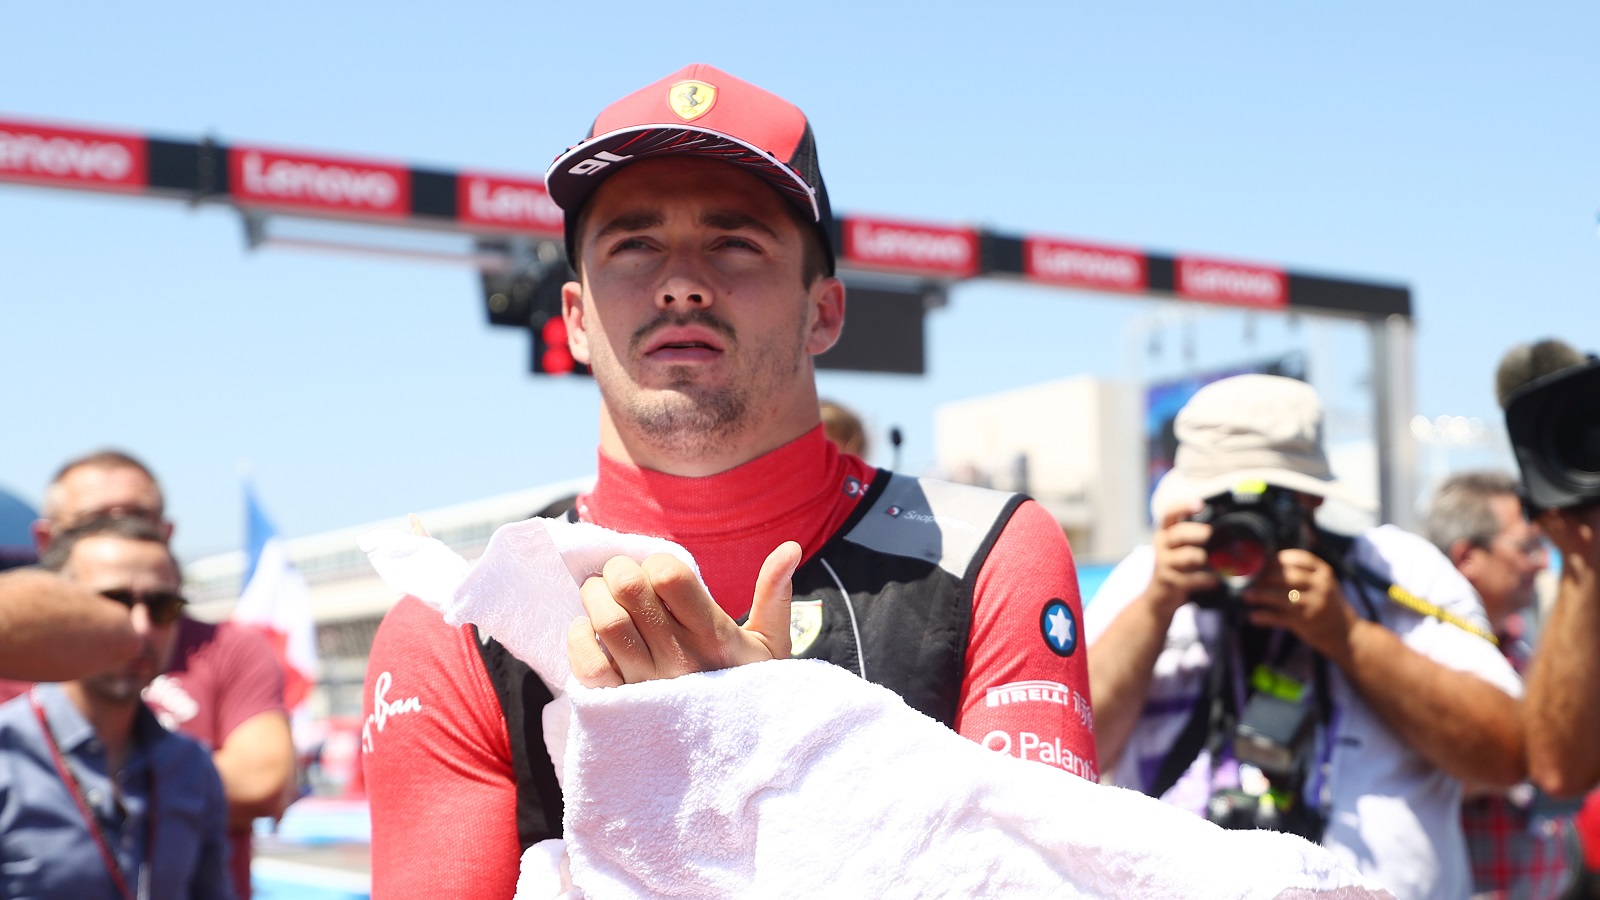 Scuderia Ferrari's Charles Leclerc prepares on the grid during the Formula 1 Grand Prix of France at Circuit Paul Ricard on July 24, 2022. | Bryn Lennon - Formula 1/Formula 1 via Getty Images